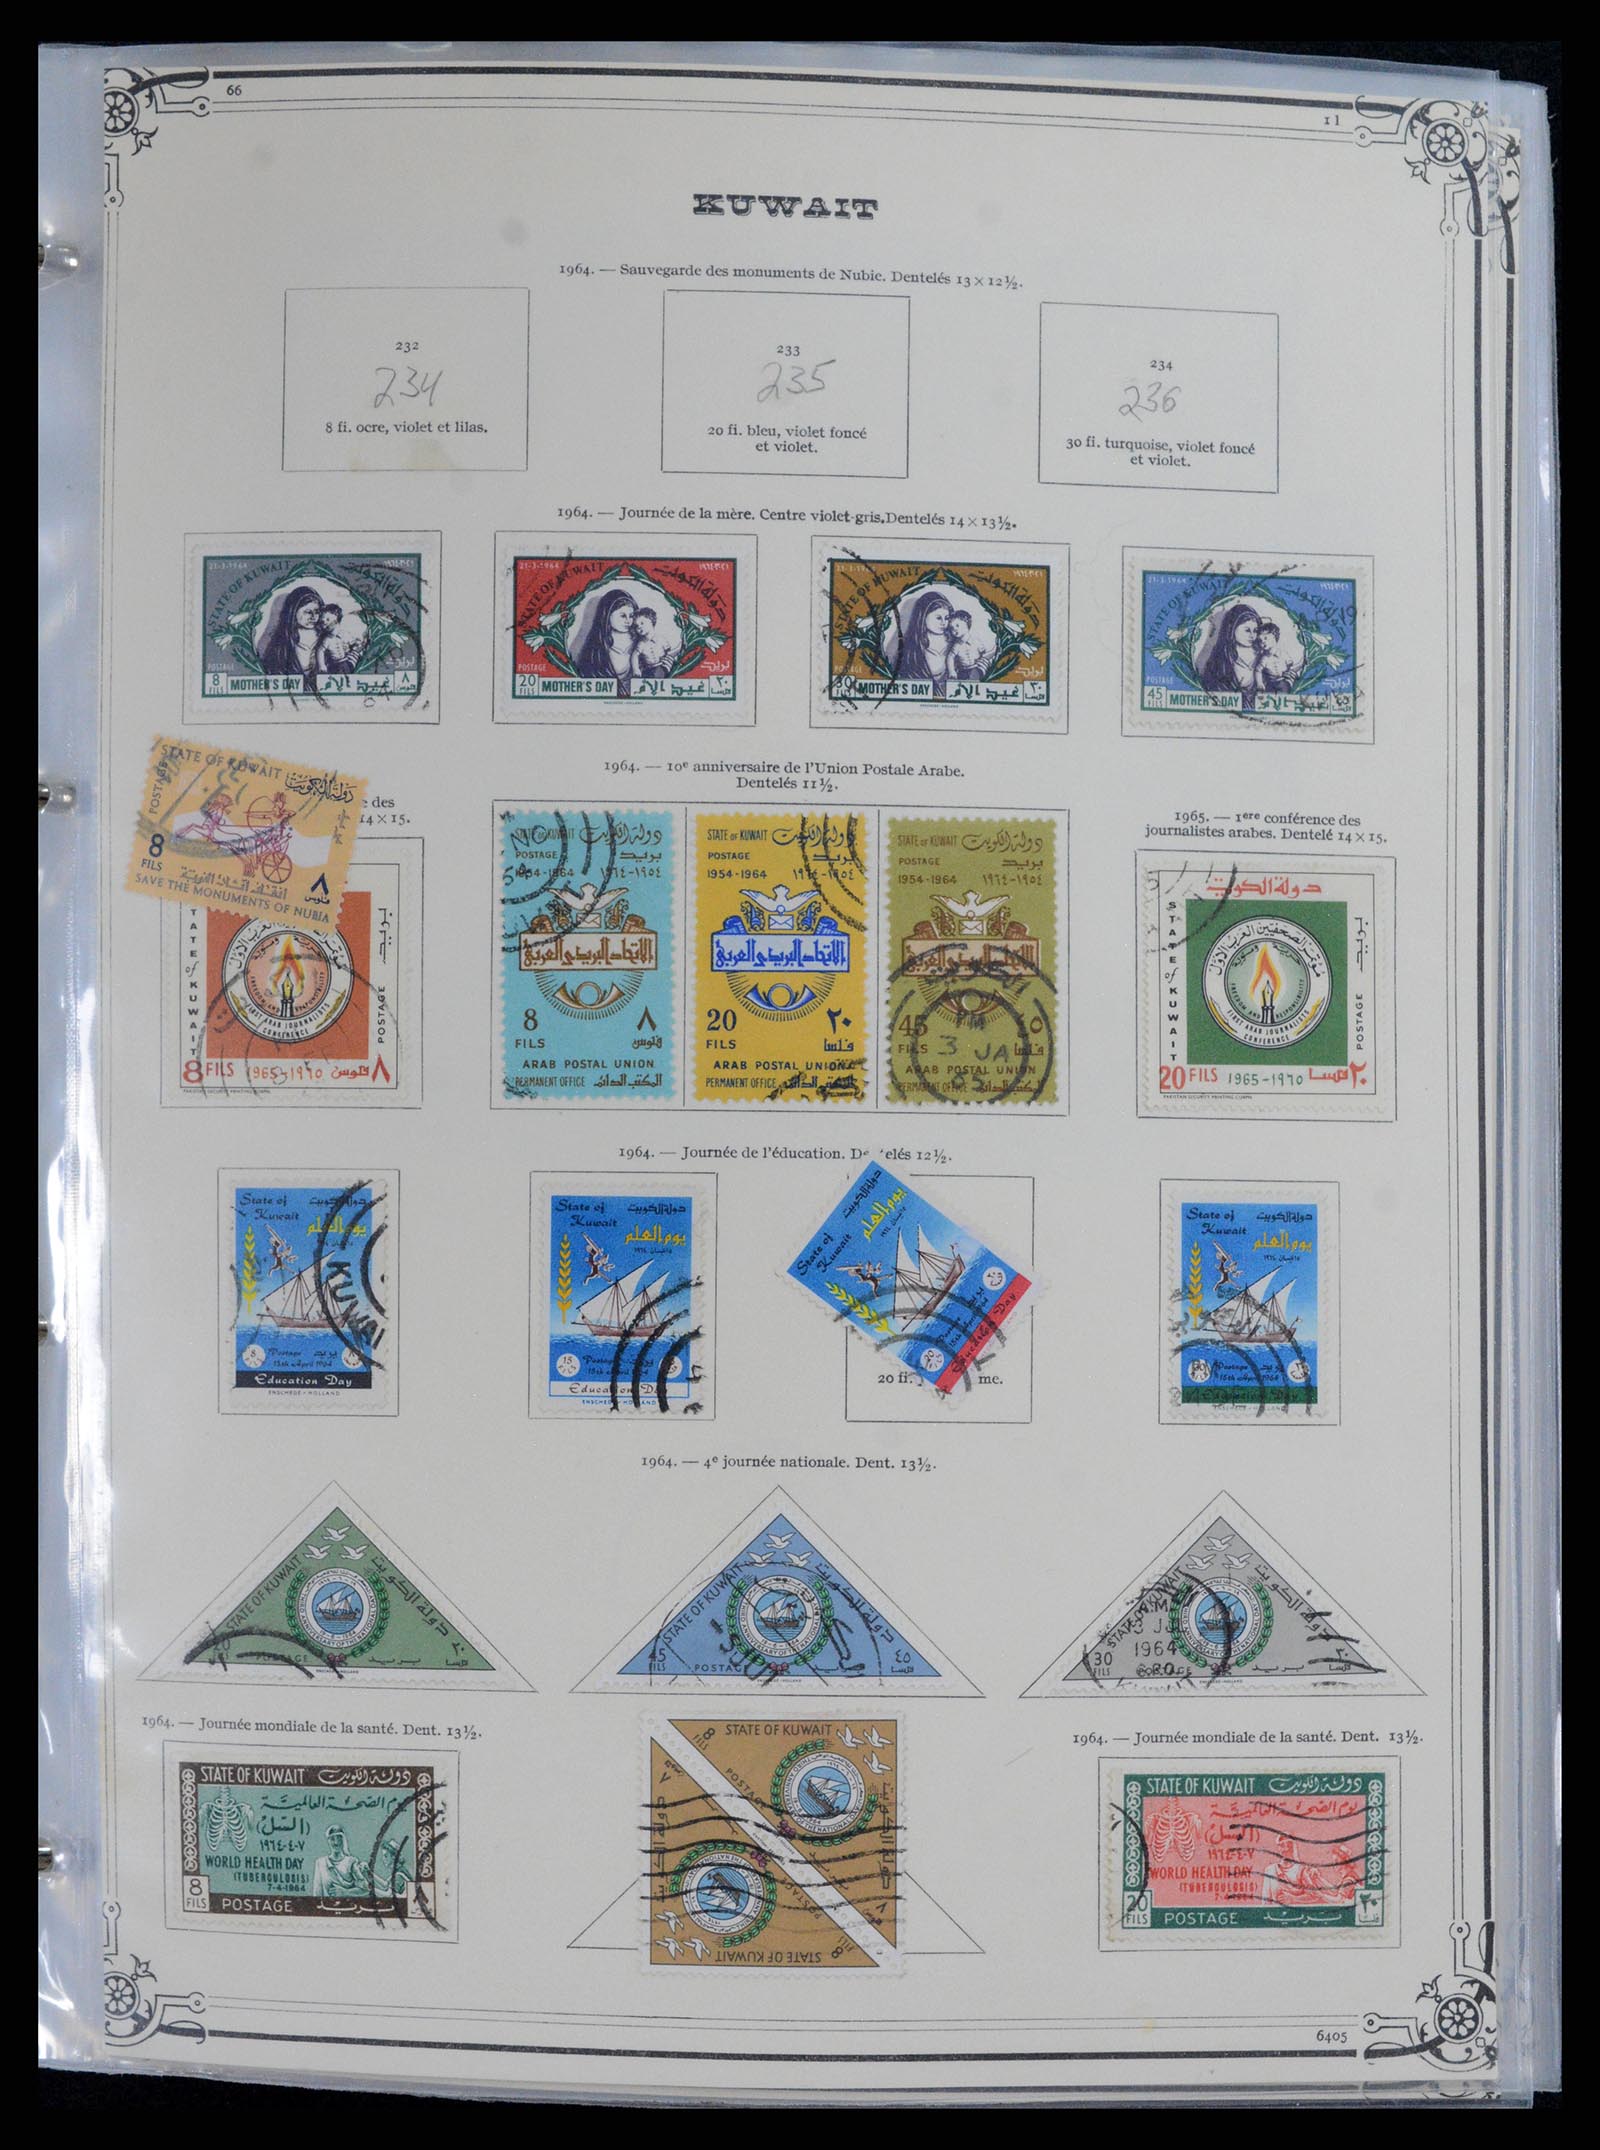 37599 023 - Stamp collection 37599 Kuwait 1949-2000.